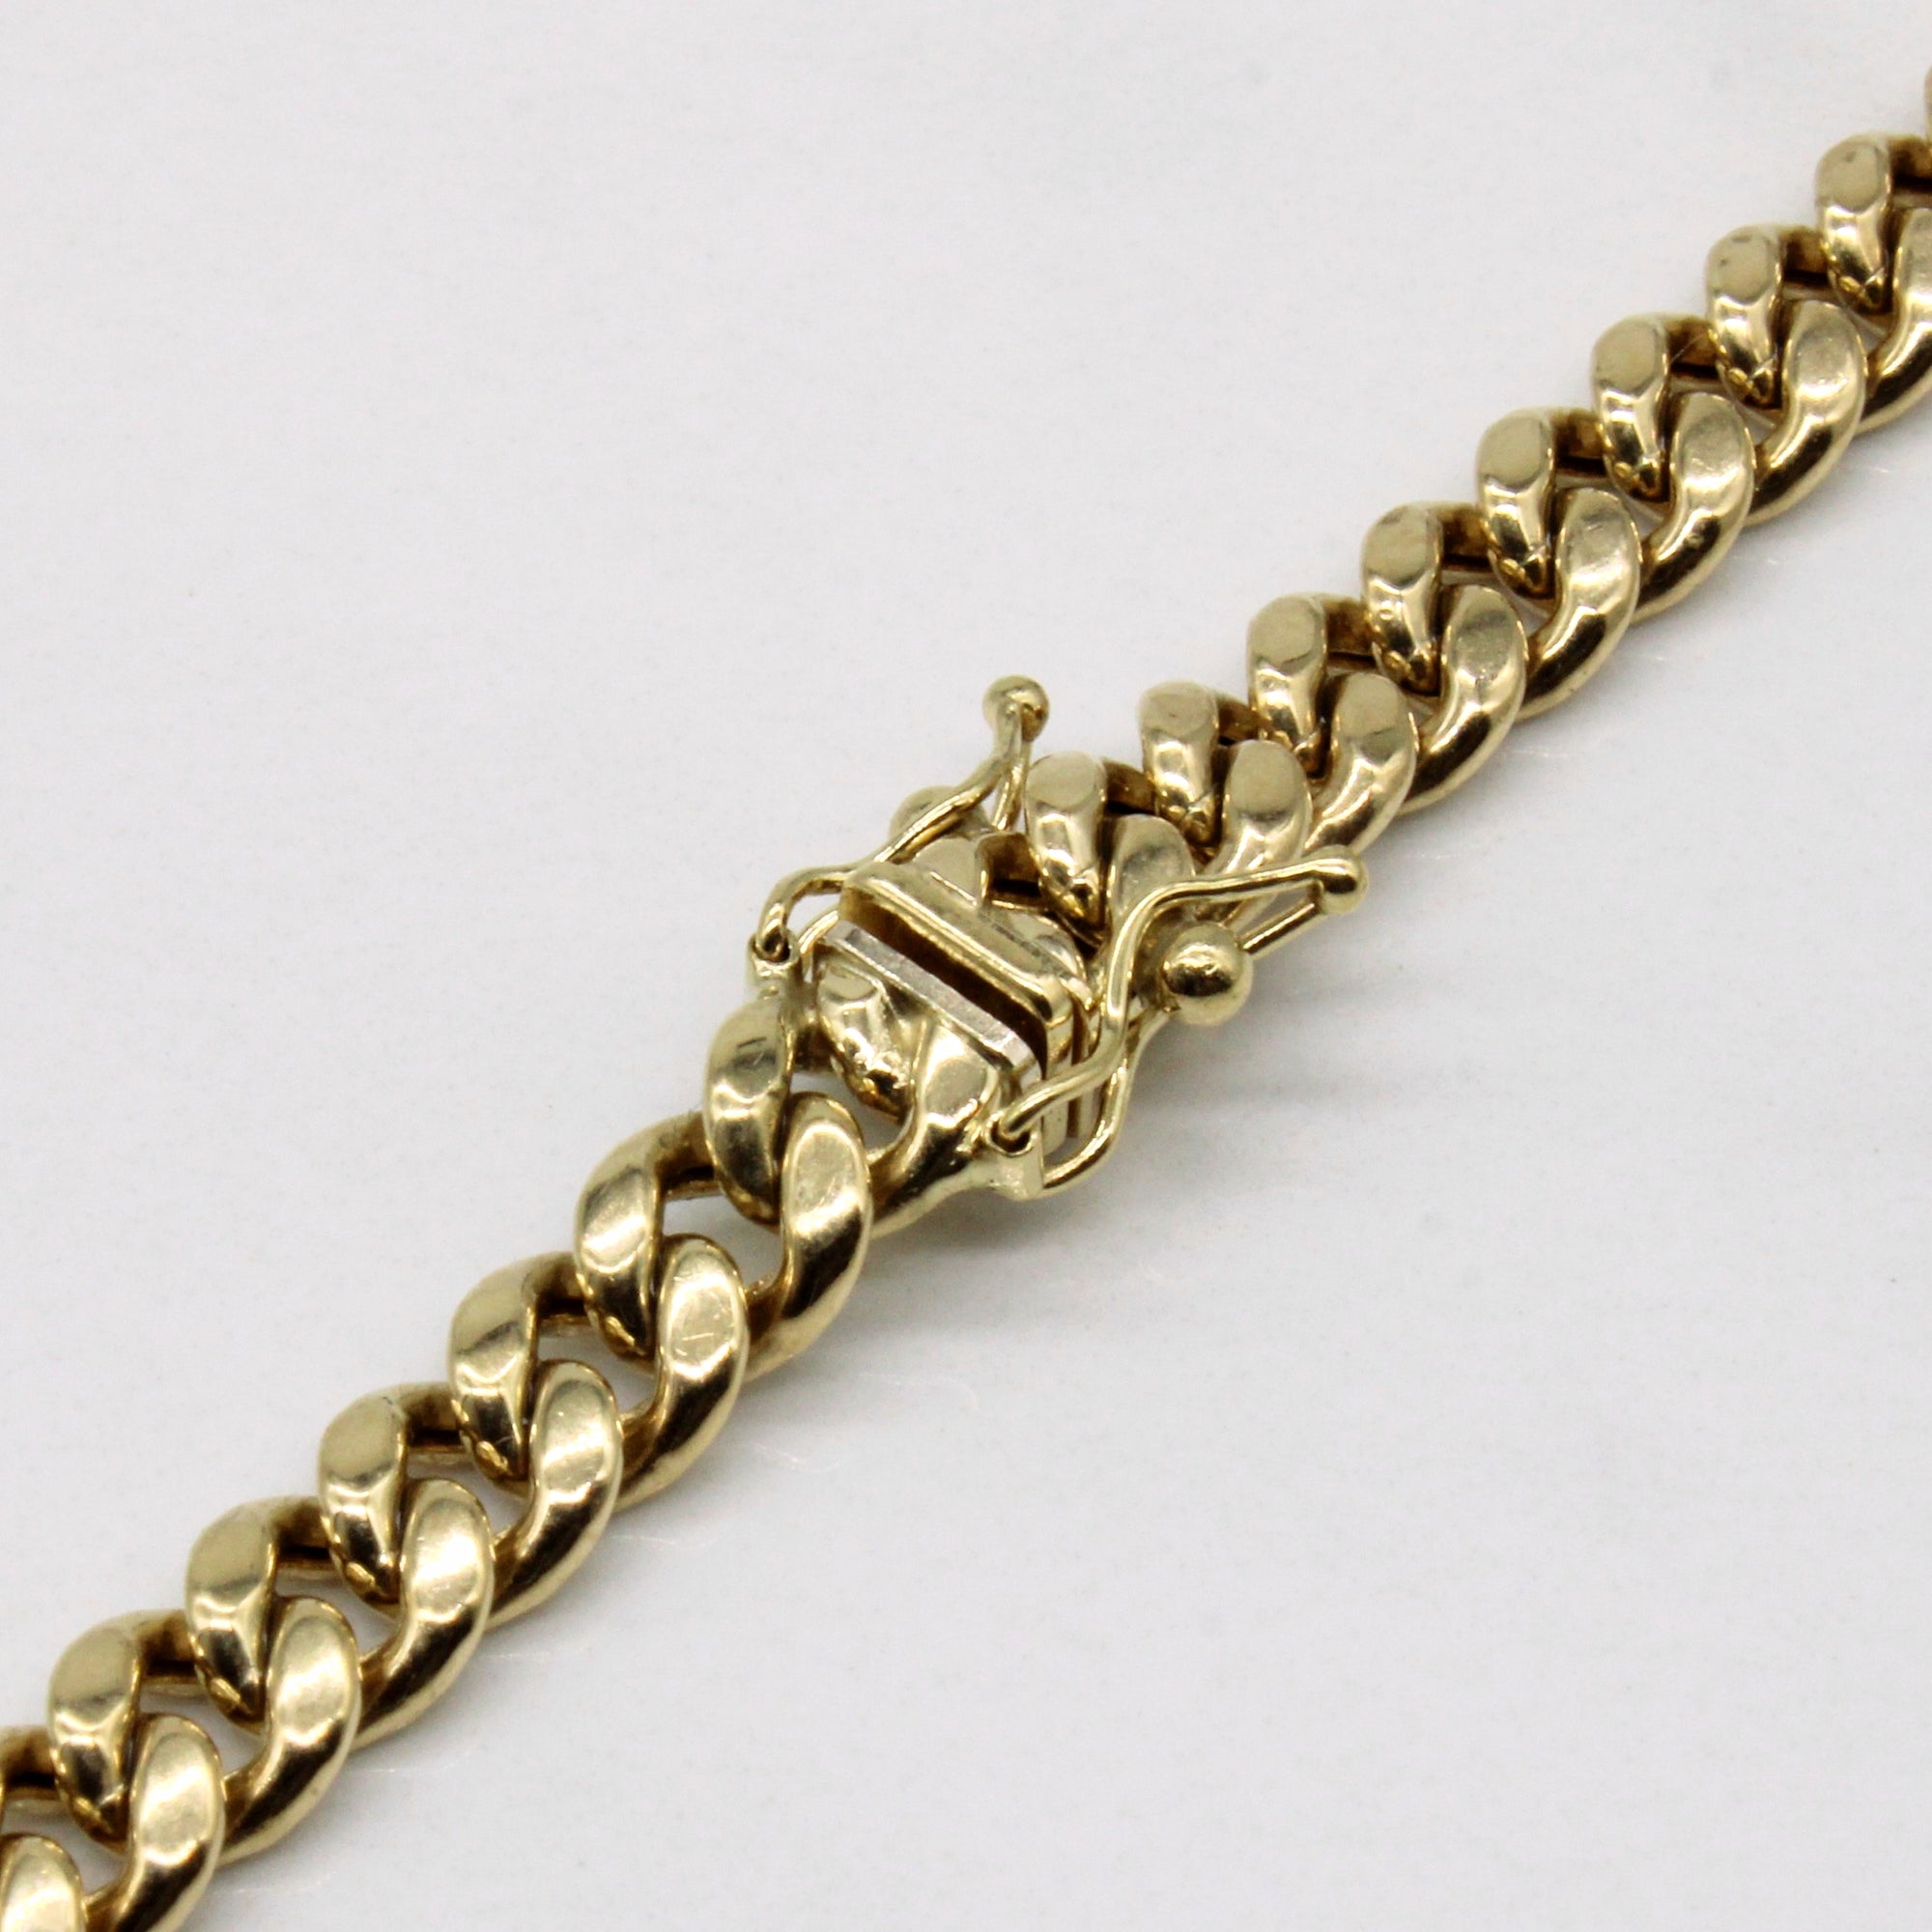 10k Yellow Gold Curb Link Necklace | 20